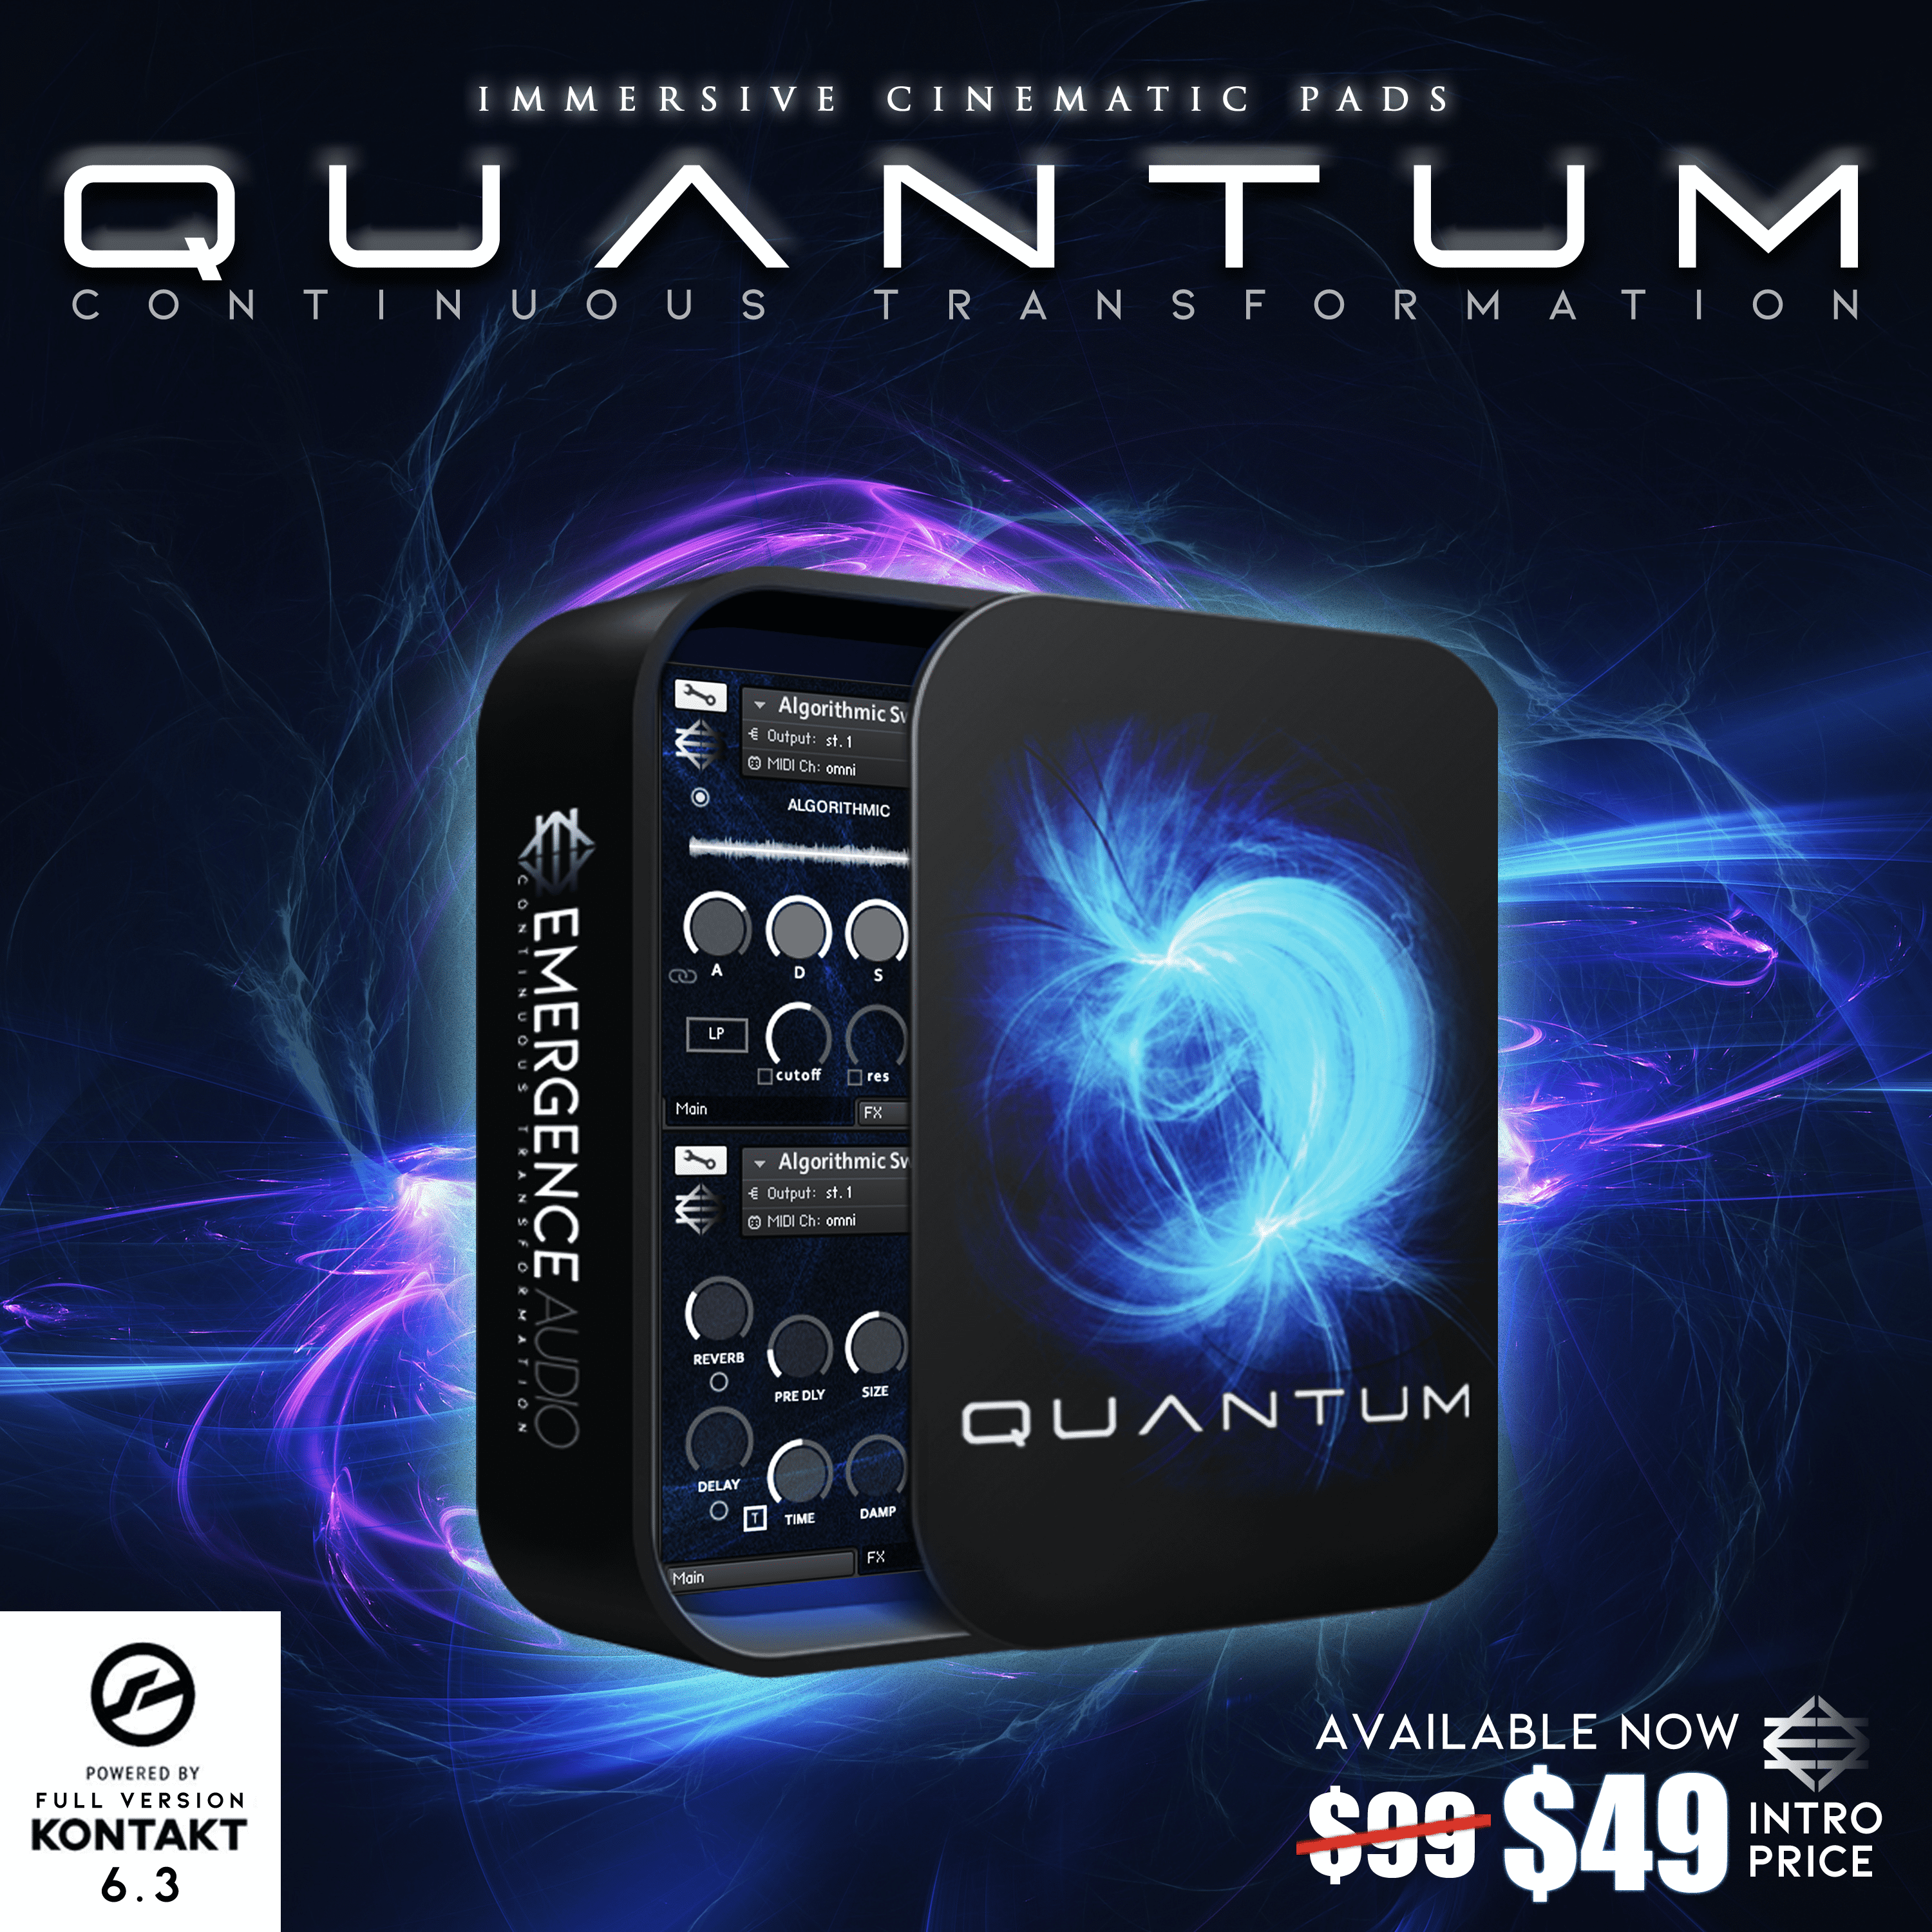 Last Chance to Save 50% on Cinematic Pad Library QUANTUM!